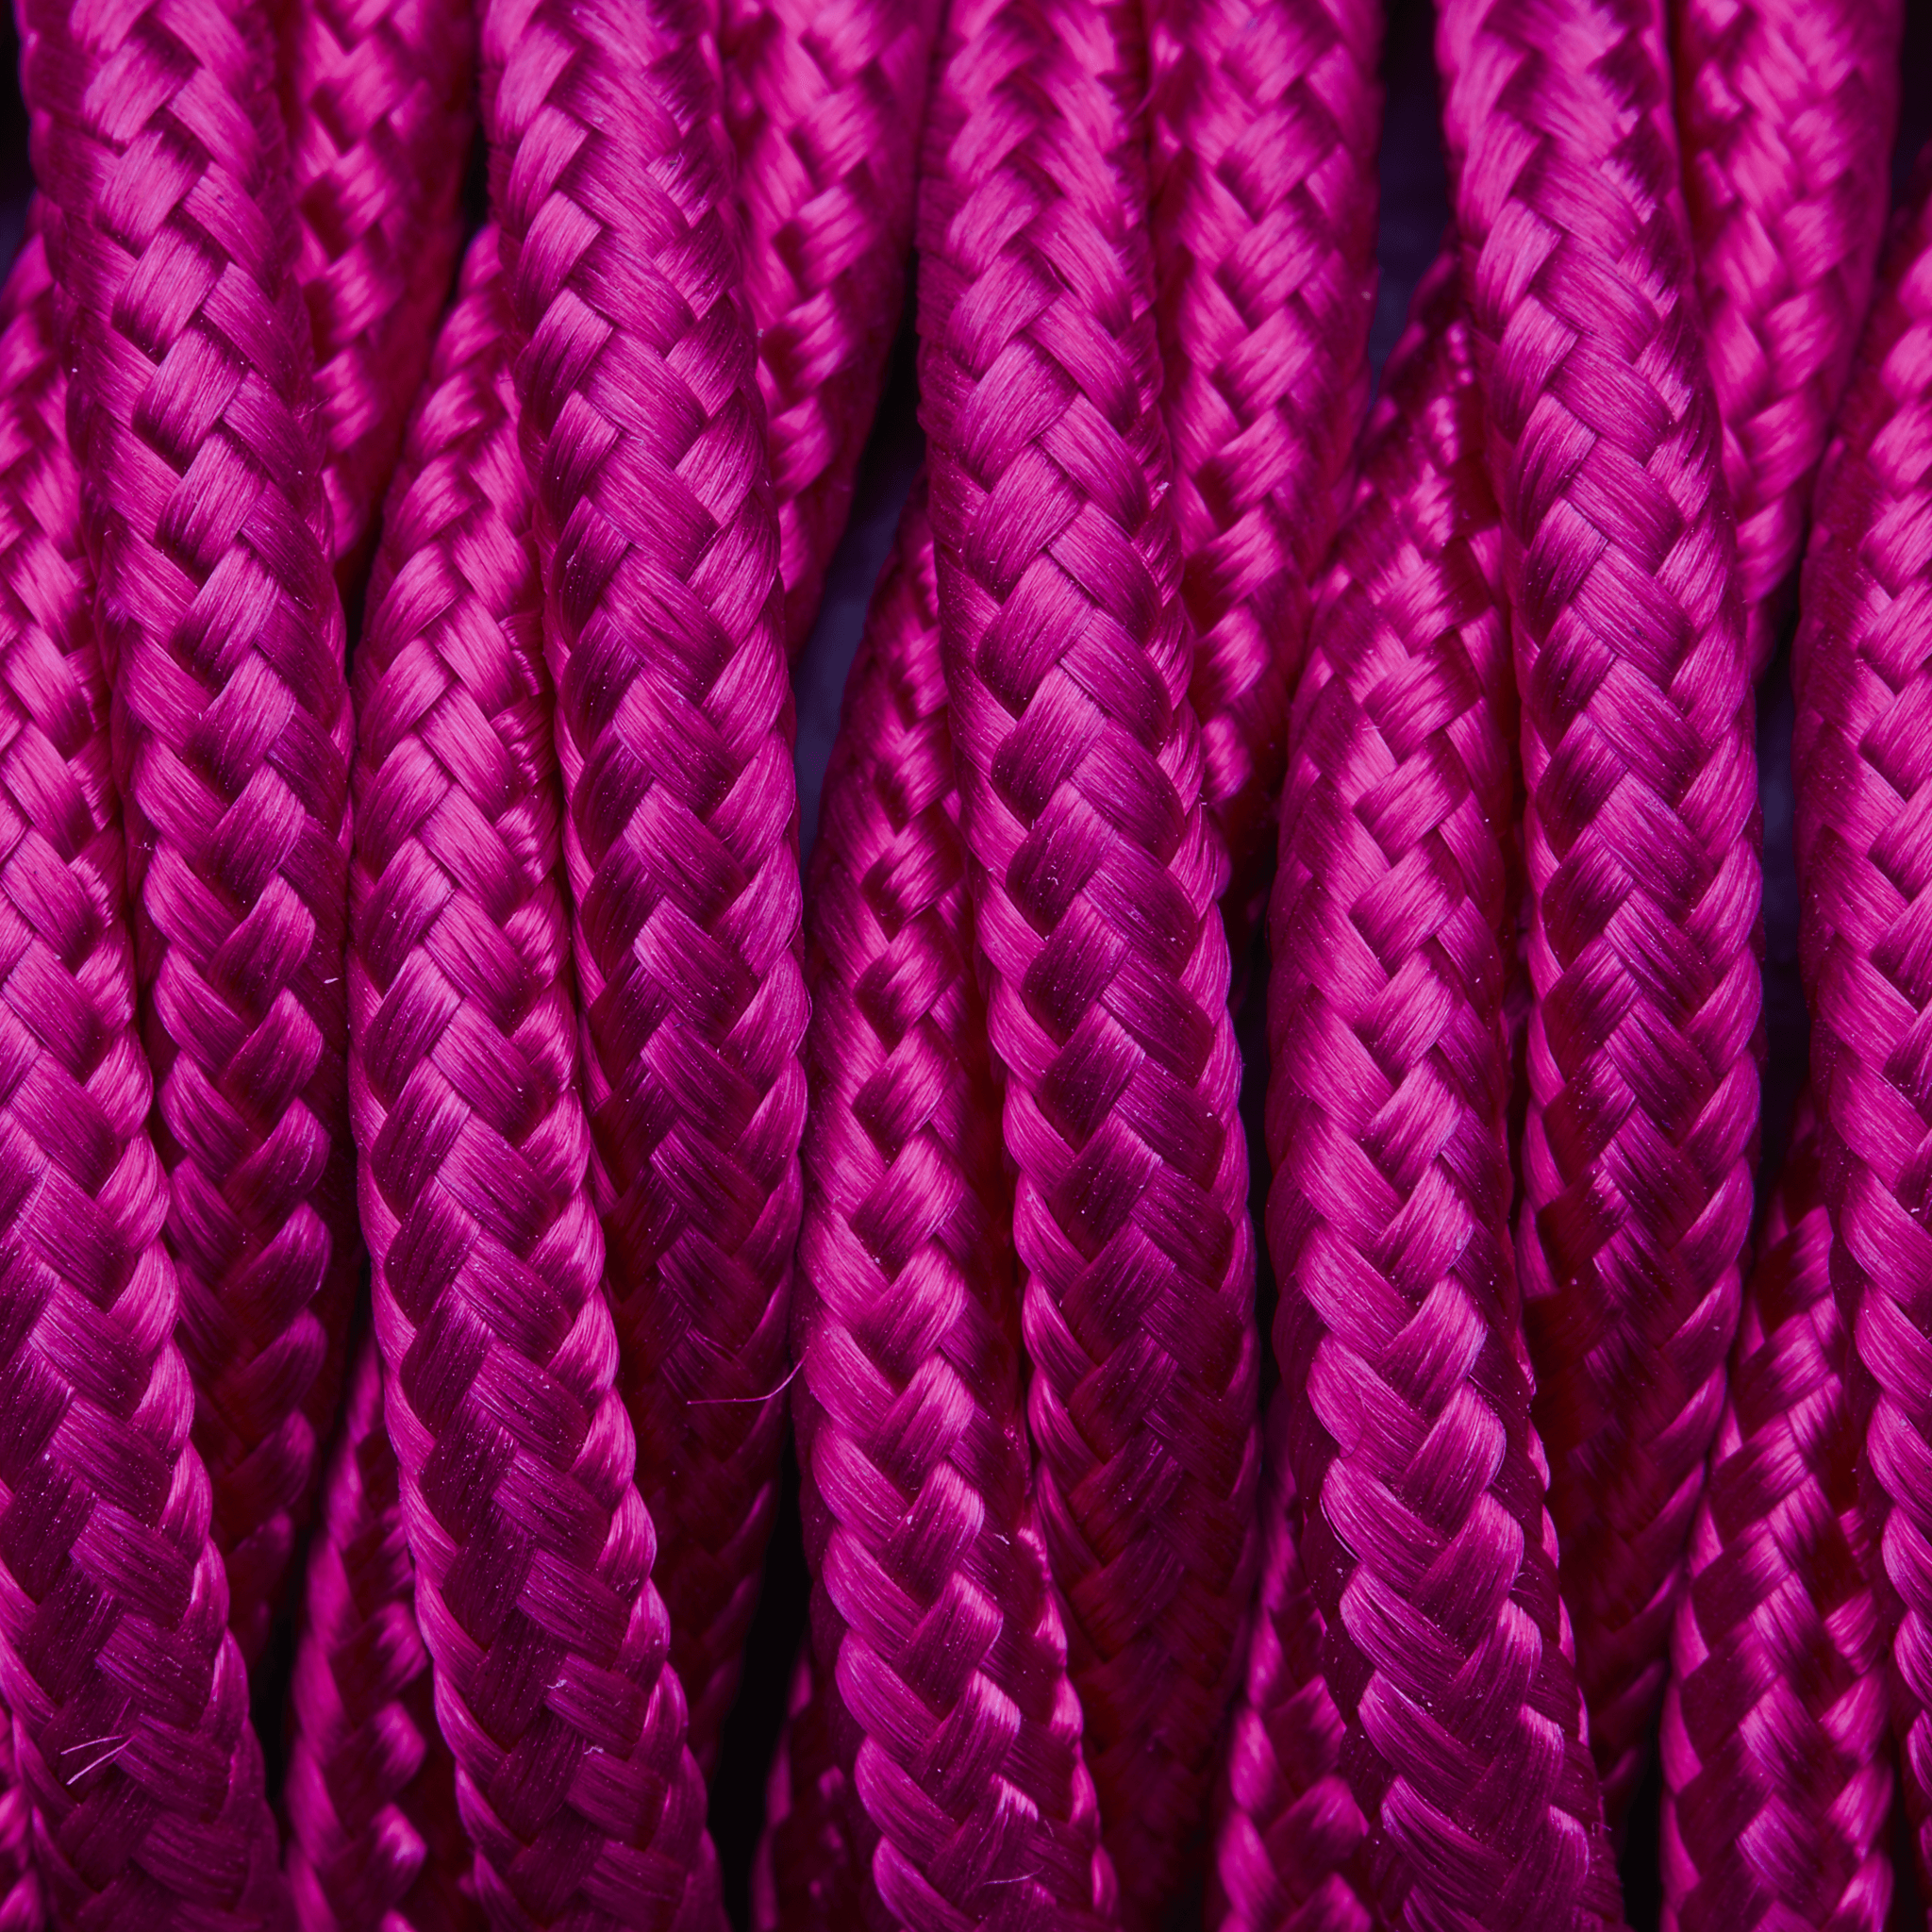 Industville – Twisted Fabric Flex – 3 Core Braided Cloth Cable Lighting Wire – Fabric Flex Cable – Pink Colour – Braided Woven Cloth Material – 100 CM